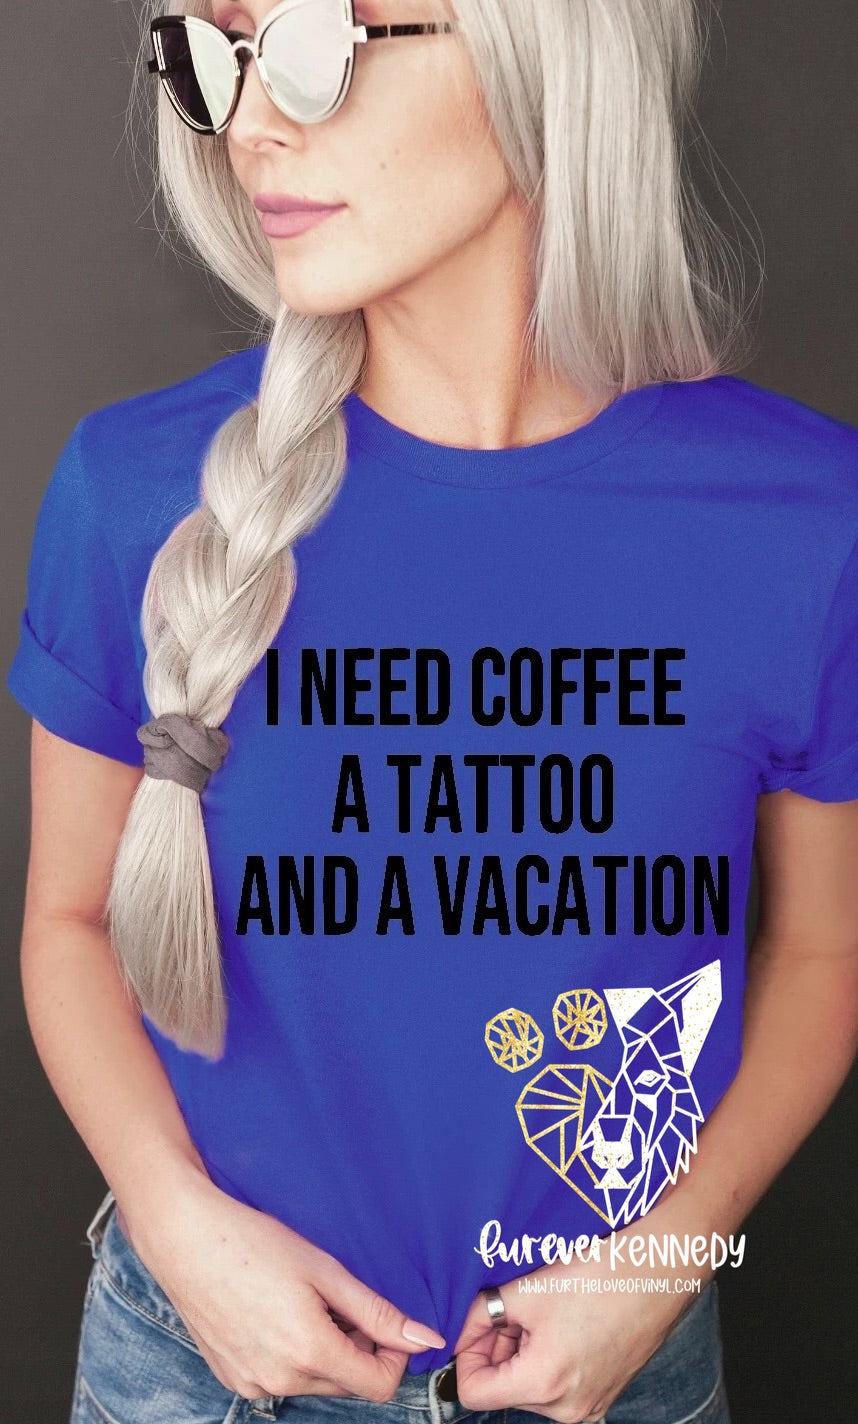 (MTO) Apparel: I need a coffee, tattoo and vacation